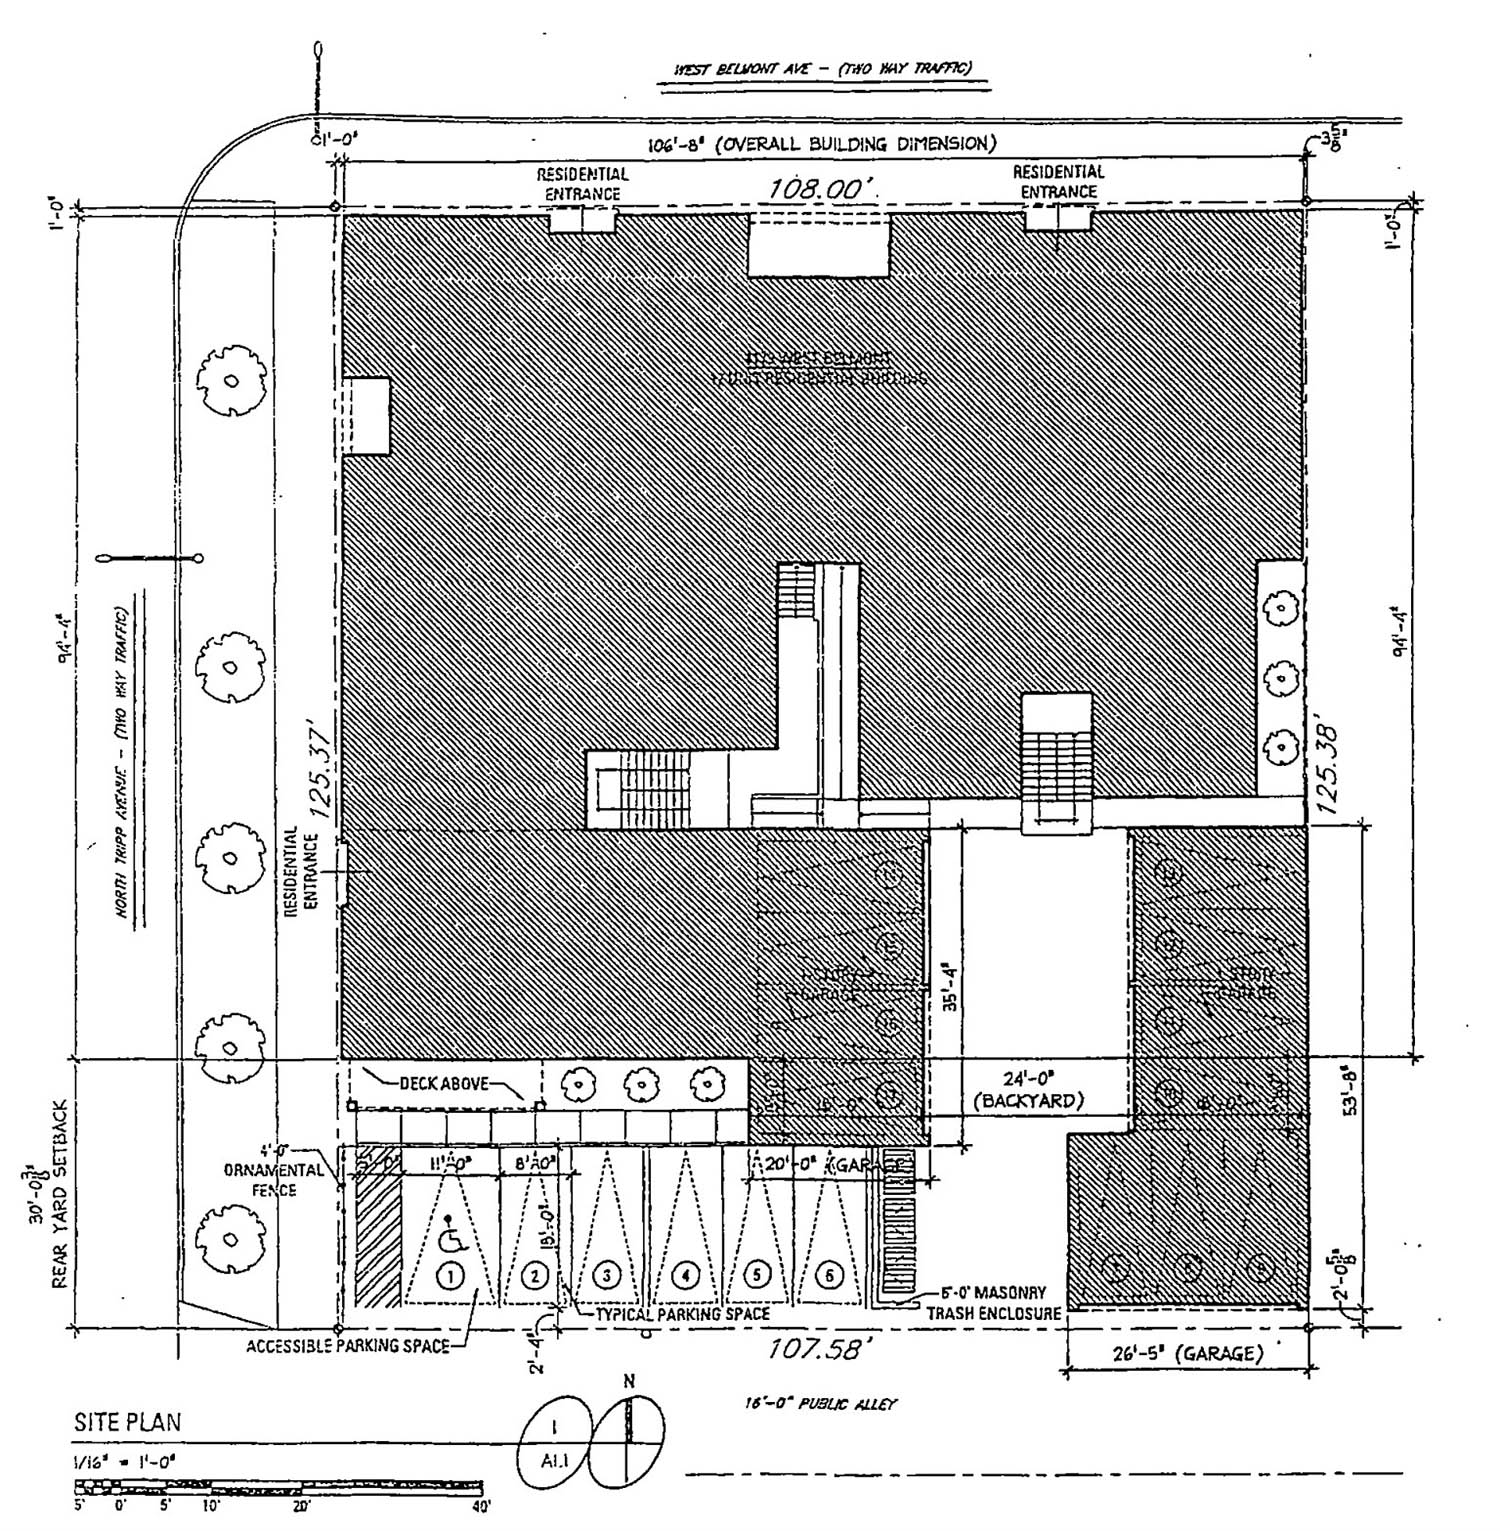 Site Plan for 4179 W Belmont Avenue. Drawing by Johnathan Splitt Architects